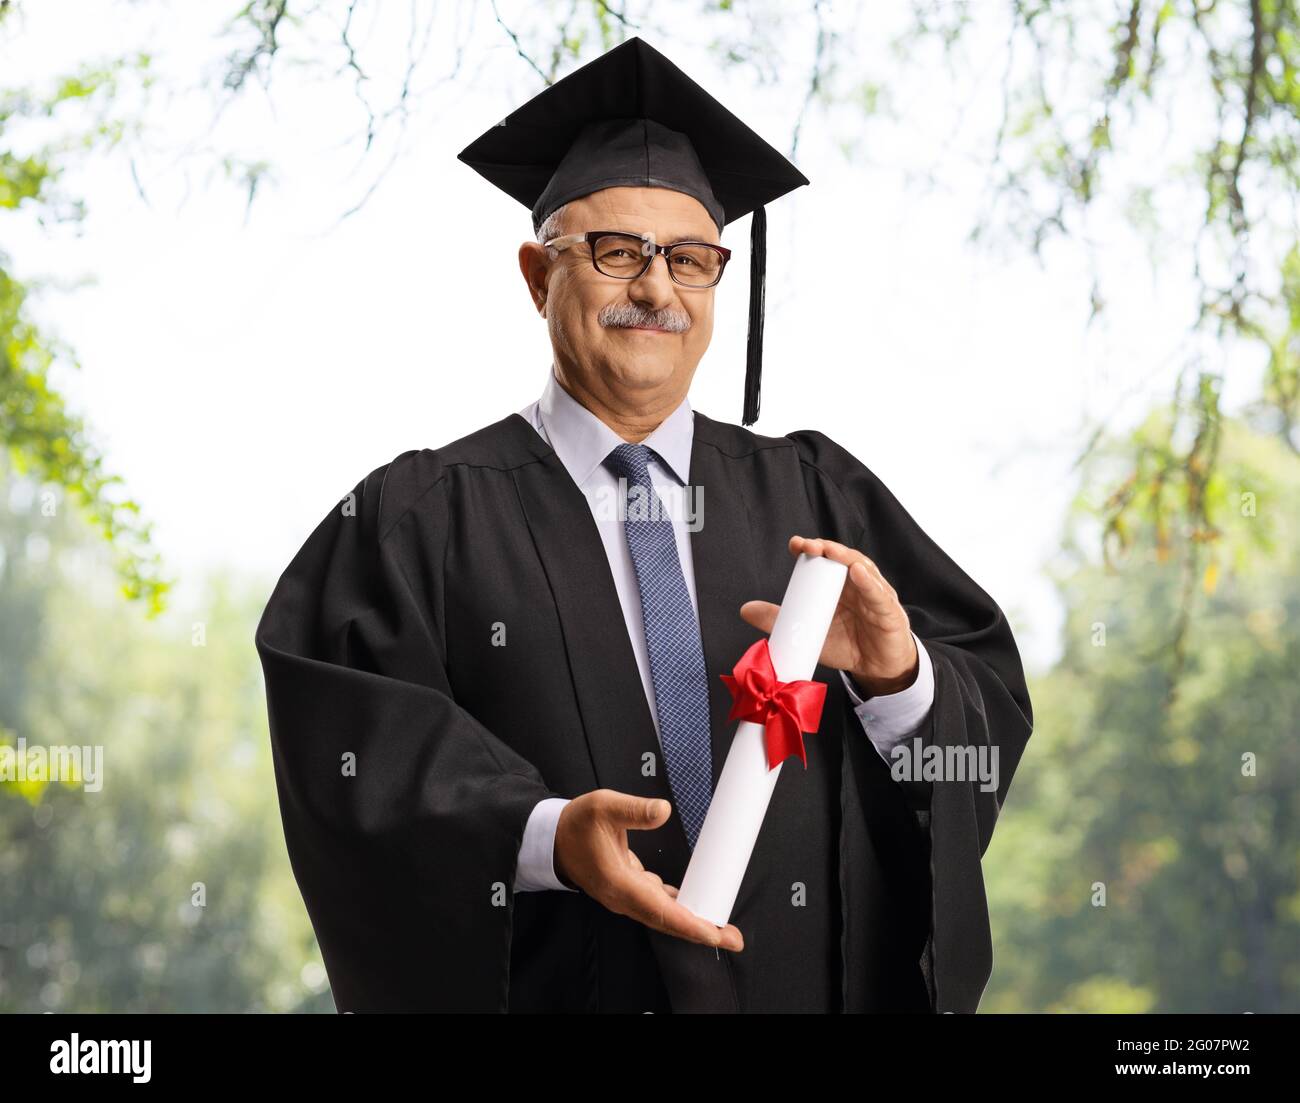 Mature man in a graduation gown holding a diploma outdoors with trees in  the background Stock Photo - Alamy